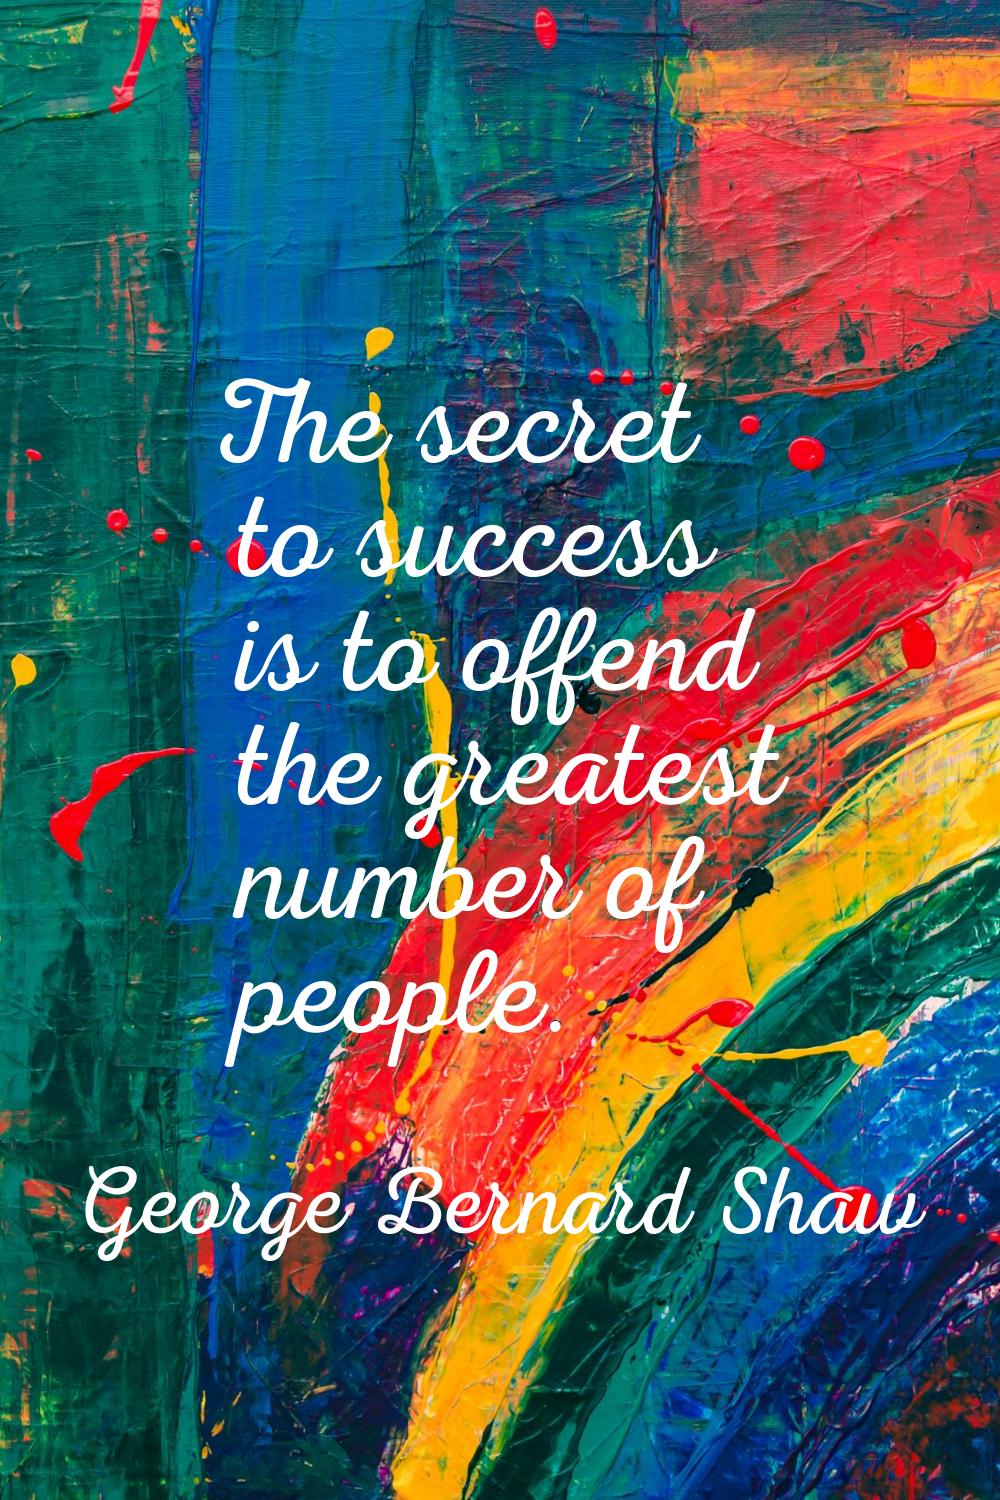 The secret to success is to offend the greatest number of people.